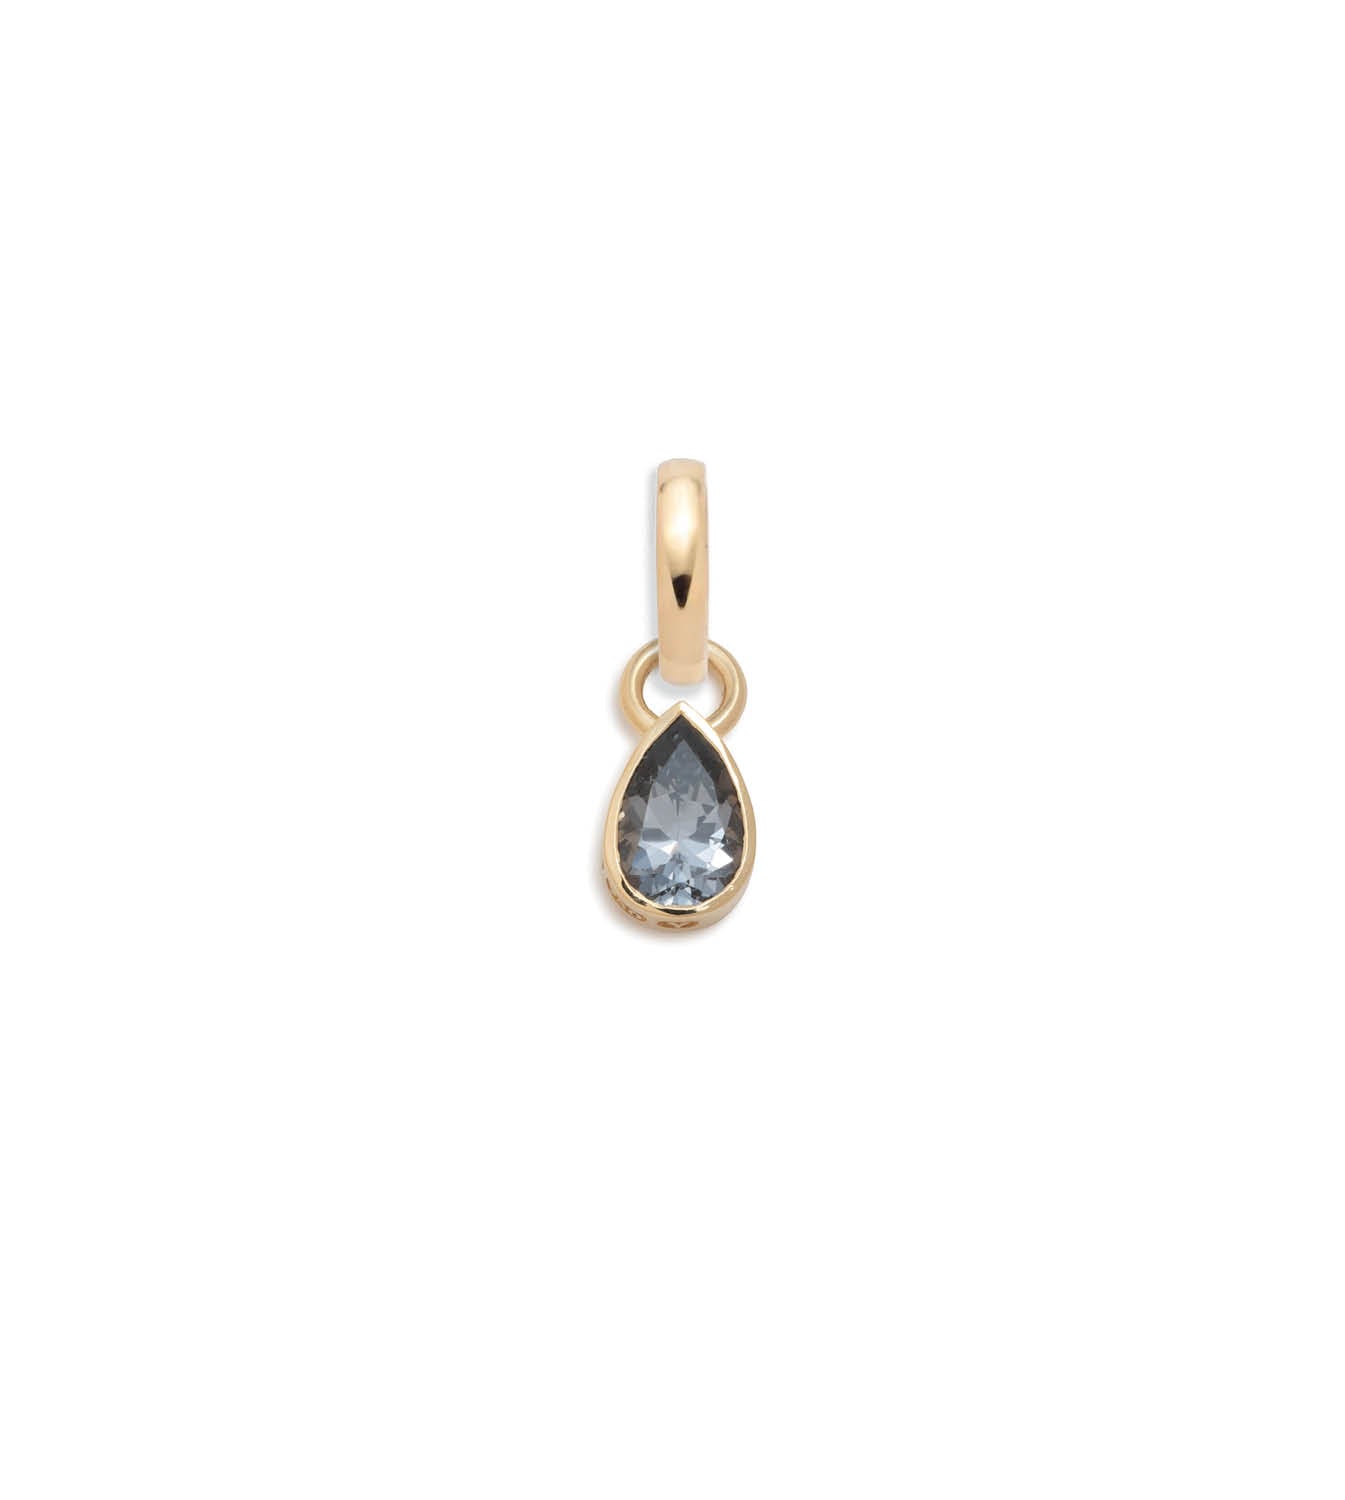 Forever & Always a Pair - Love : .7ct Grey Spinel Pear Pendant with Oval Pushgate